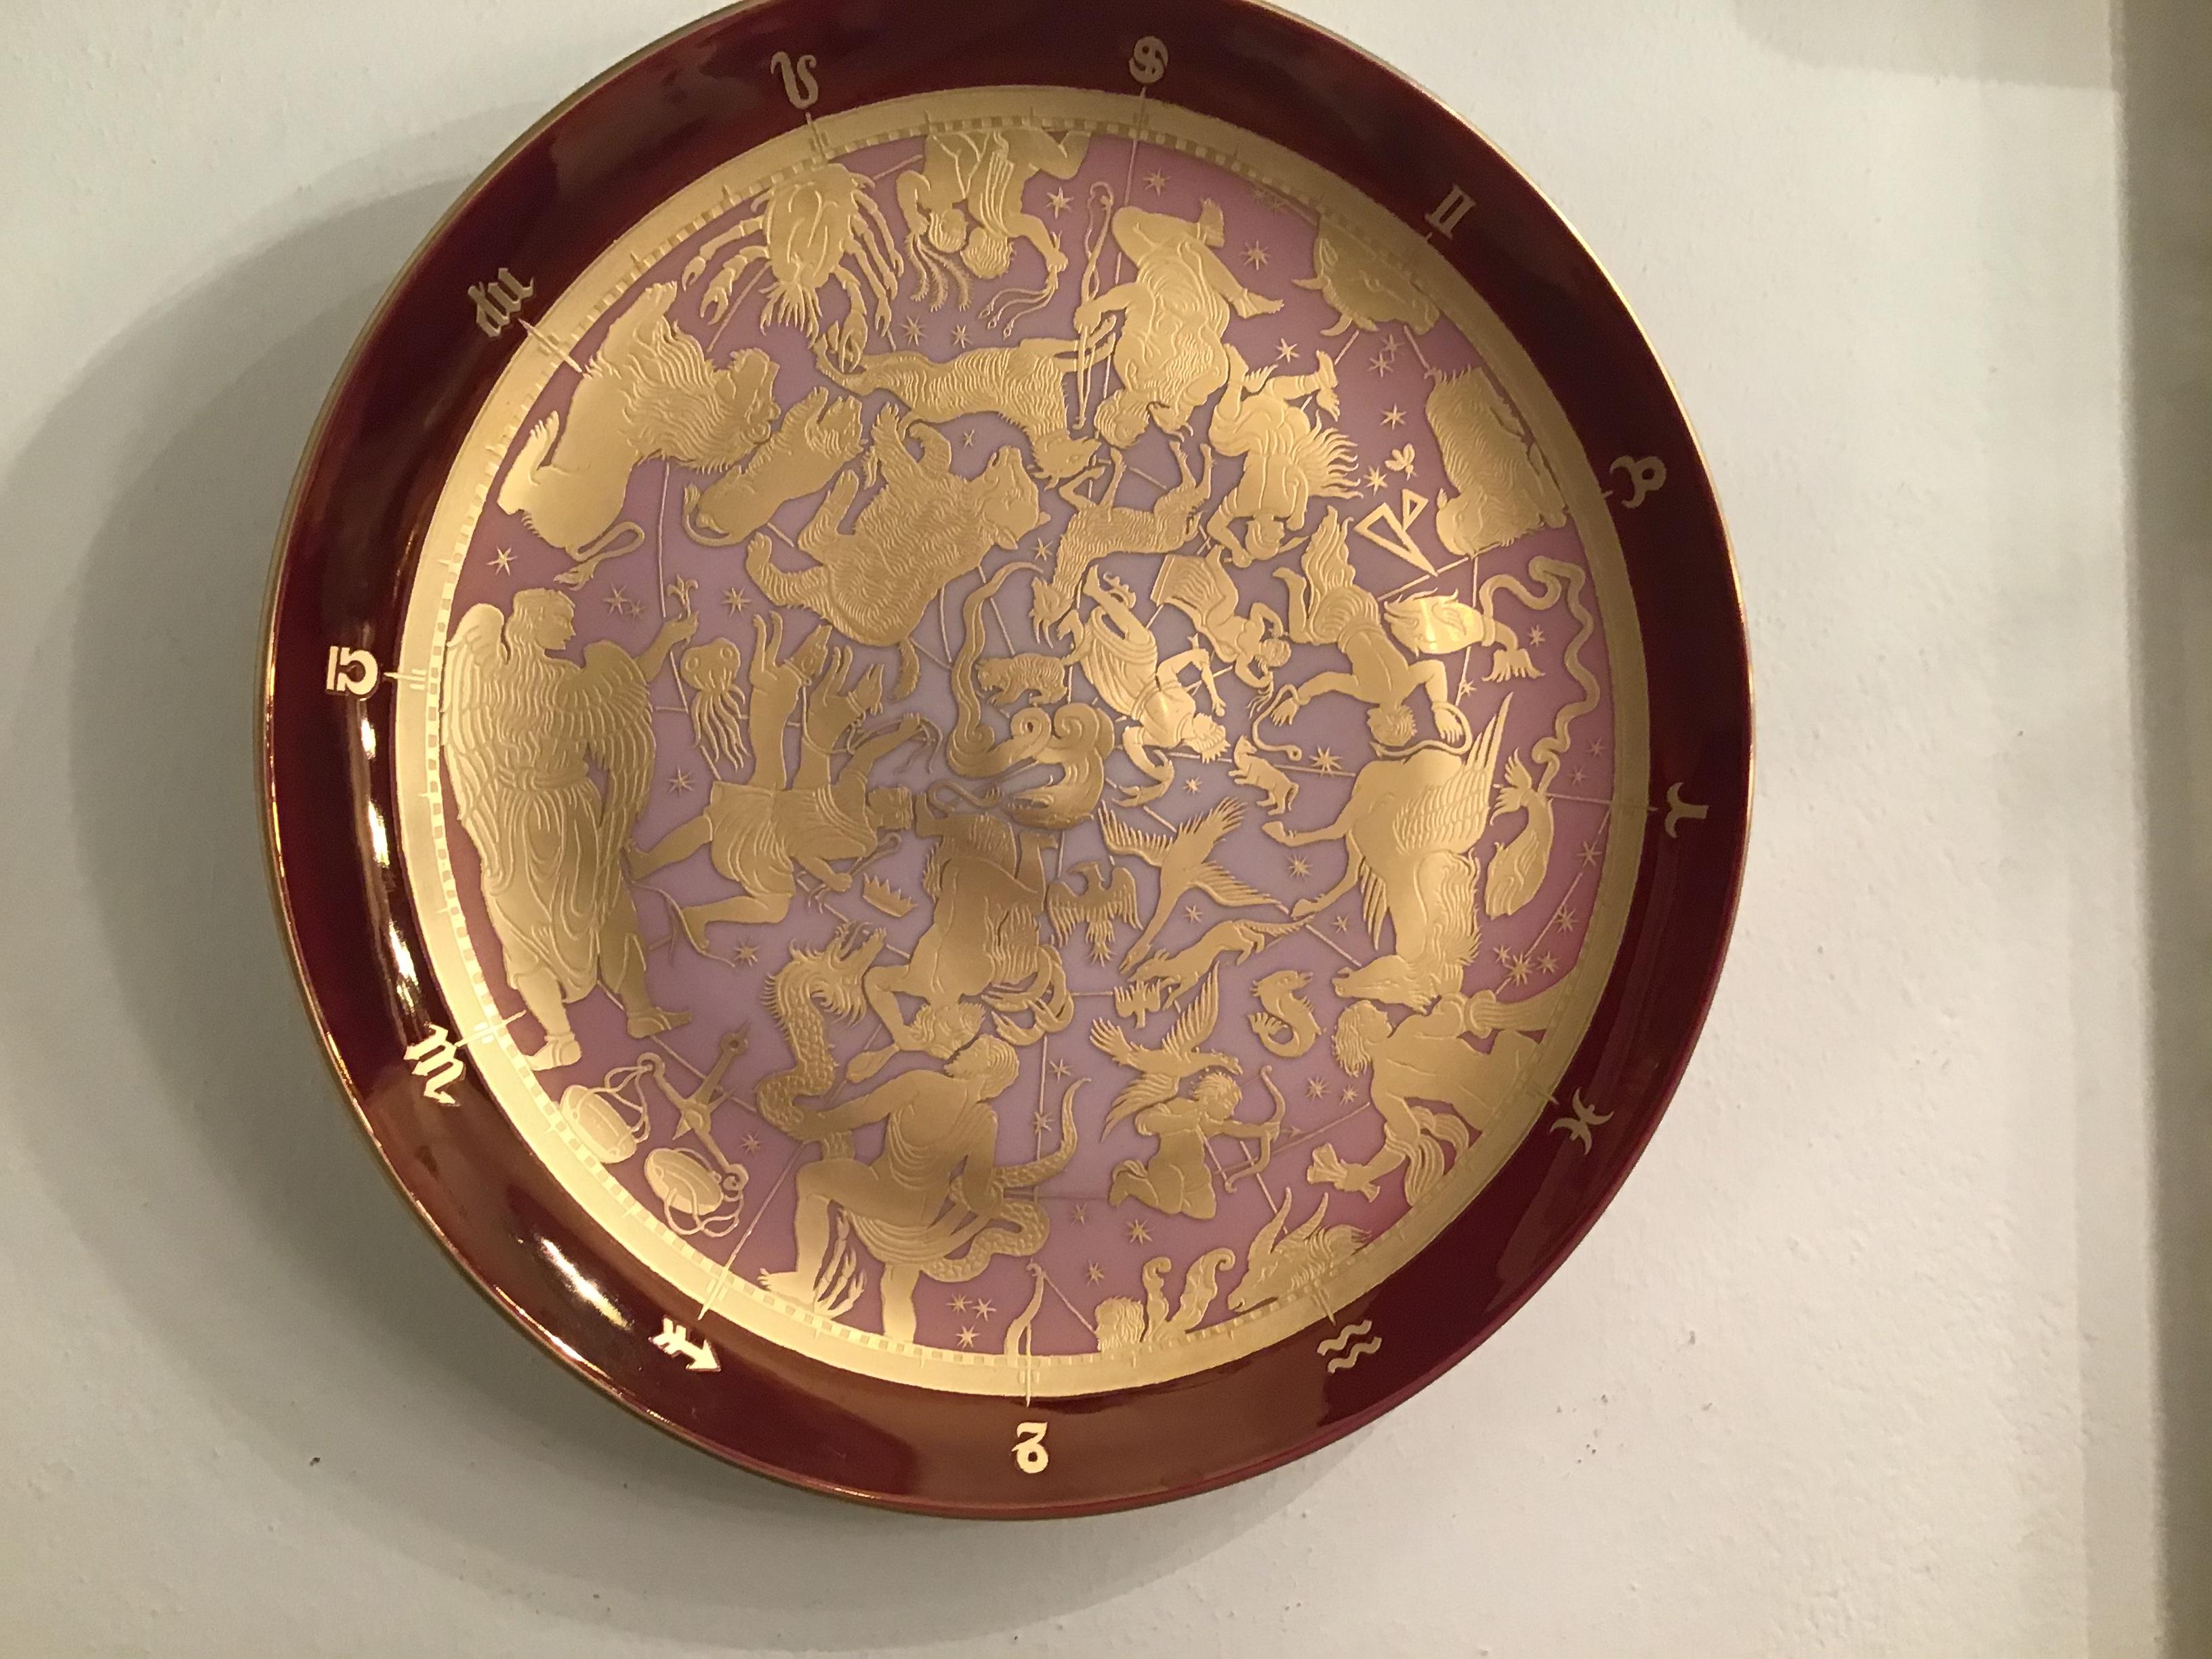 Morbelli Porcelain Wall Plate “Planisfero Celeste” Worked with Pure Gold 1960 It For Sale 6